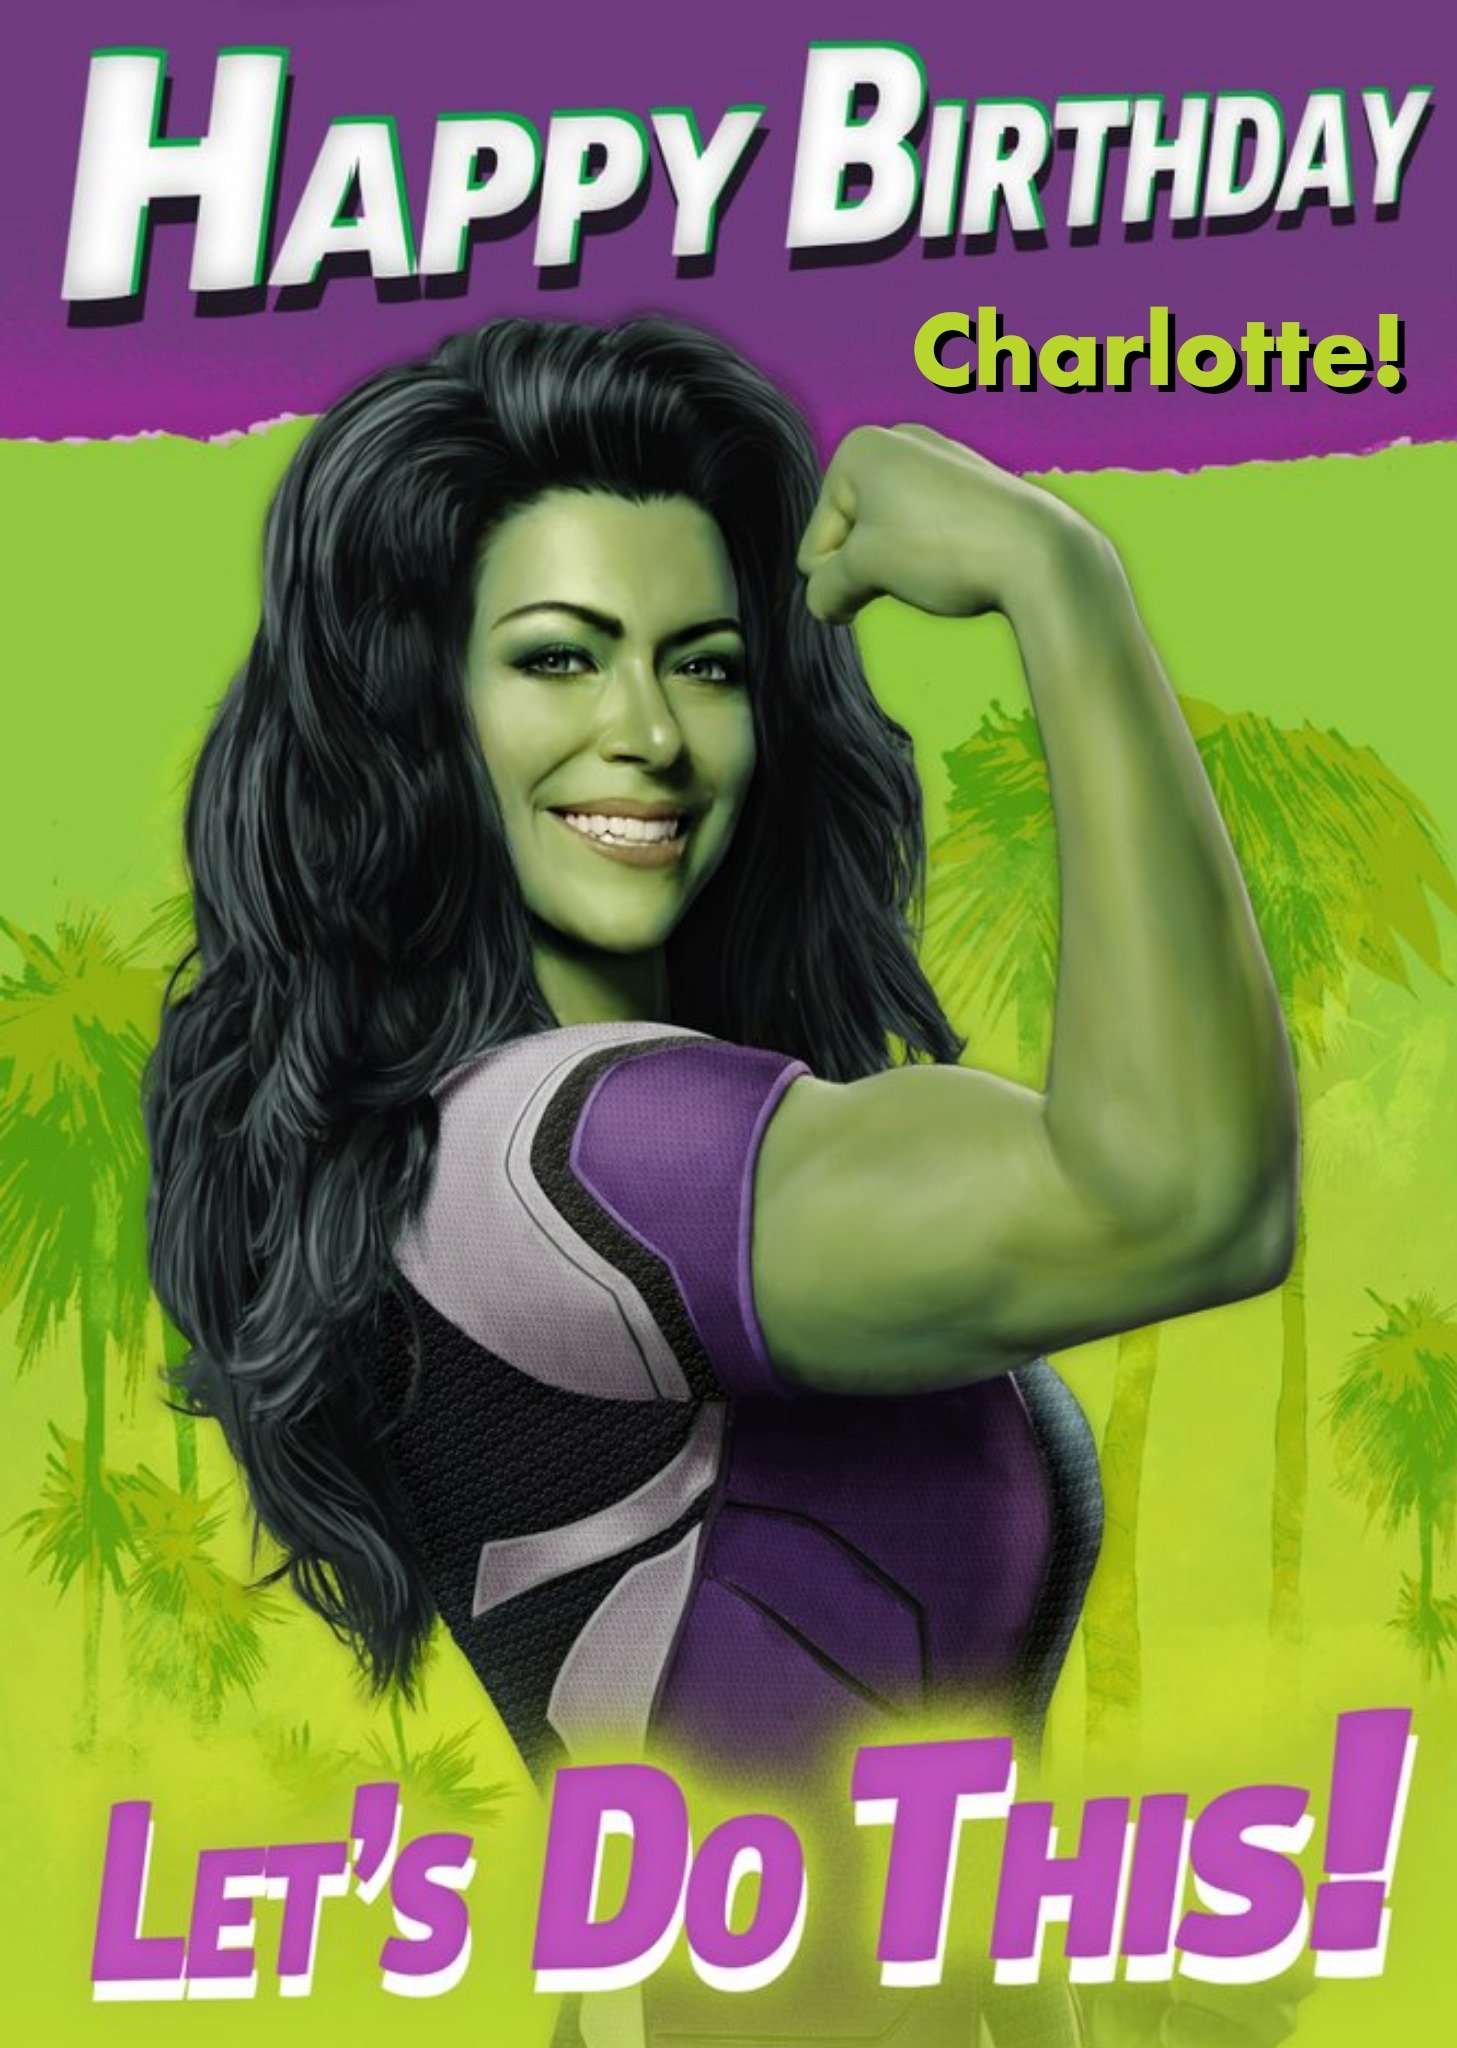 Marvel Illustration Of She Hulk On A Green Background With Palm Trees She Hulk Birthday Card Ecard